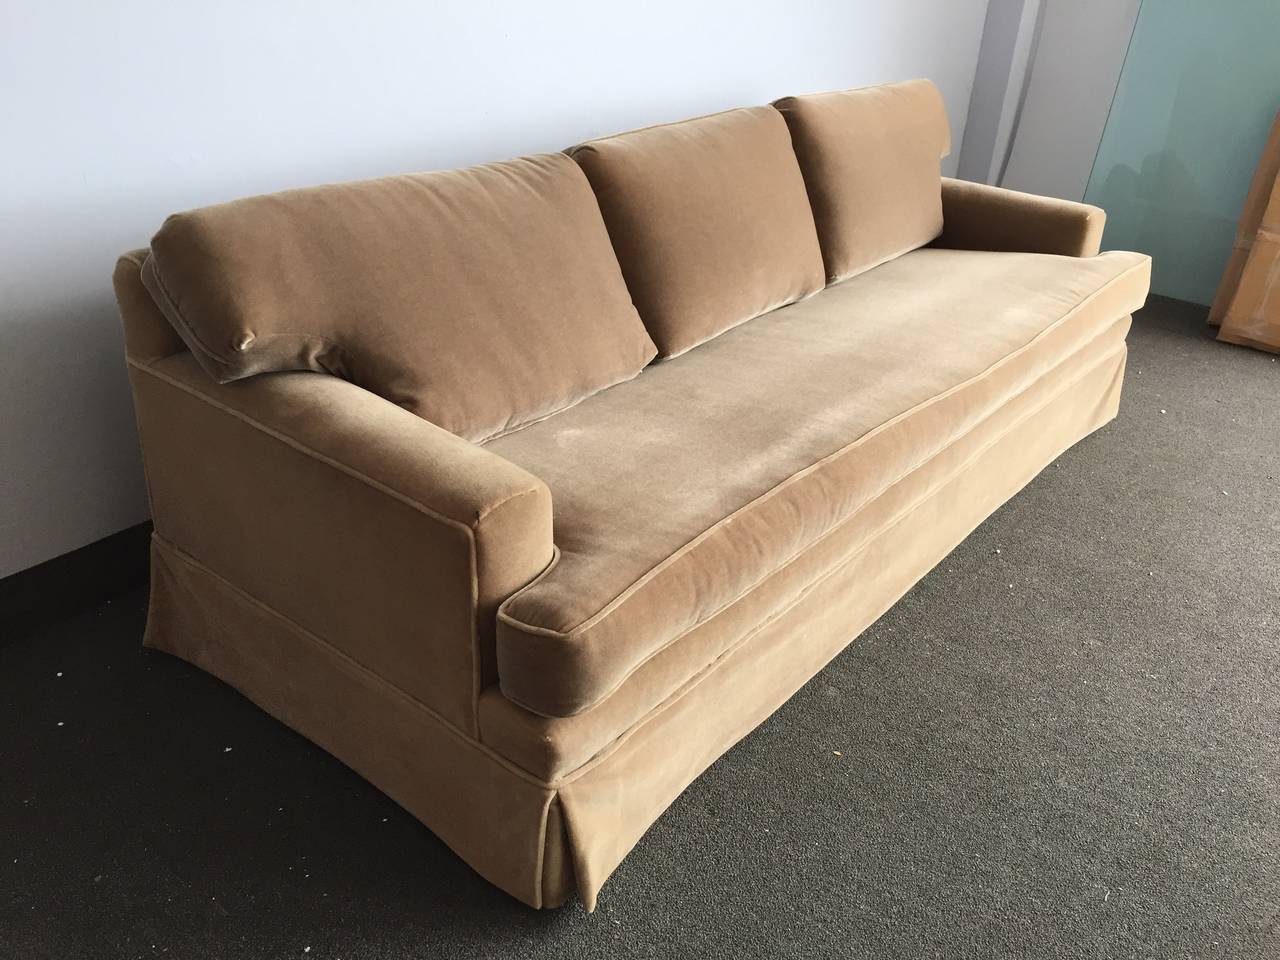 Fresh from a Southampton estate, this incredible high quality long sofa with single seat cushion and low back cushions. Very comfortable!

